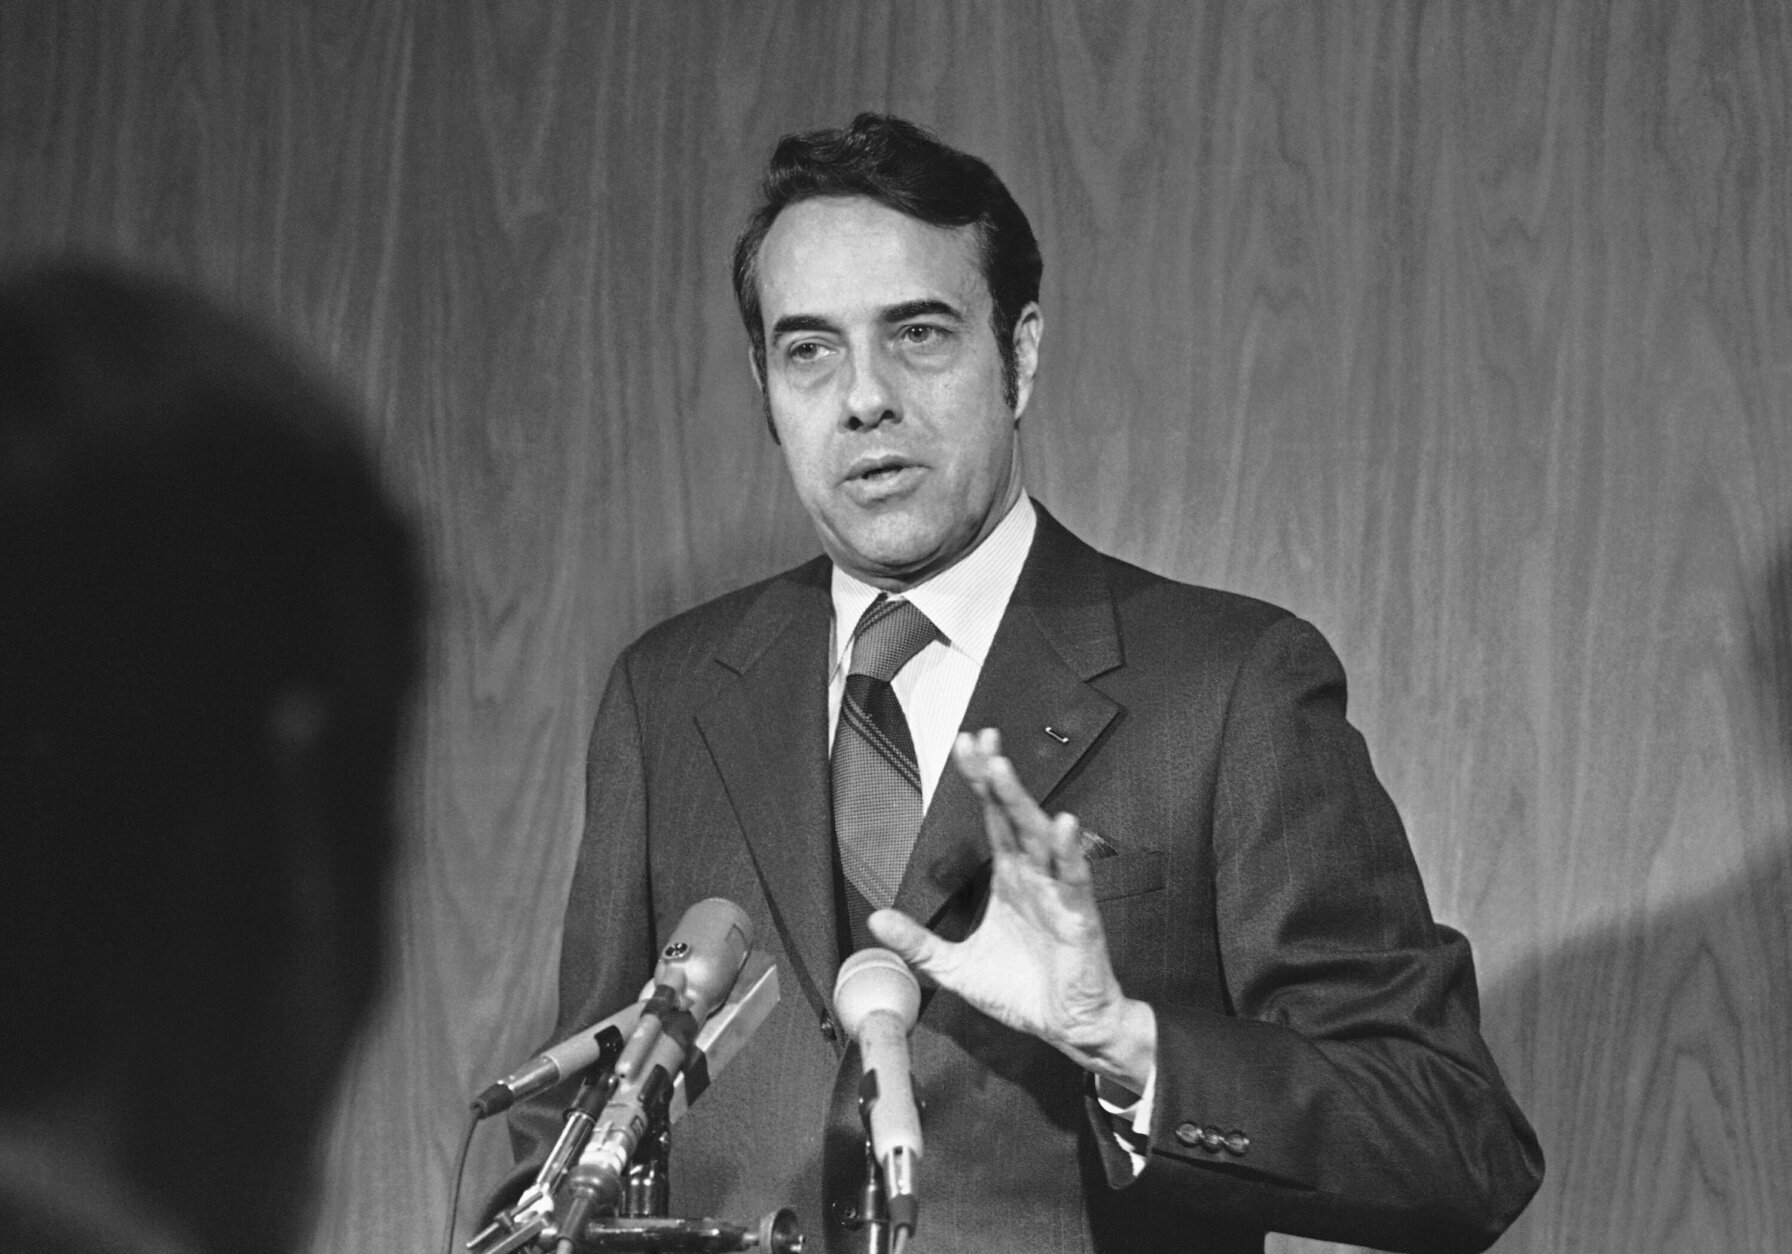 Sen. Robert Dole, R-Kan., discussed Senate security at a news conference March 9, 1971 in St. Louis, after an explosion in the U.S. Capitol. Dole said senators are vulnerable to anyone who might throw a bomb or even "a Wilkie button" from the open gallery. (AP Photo/Fred  Waters)